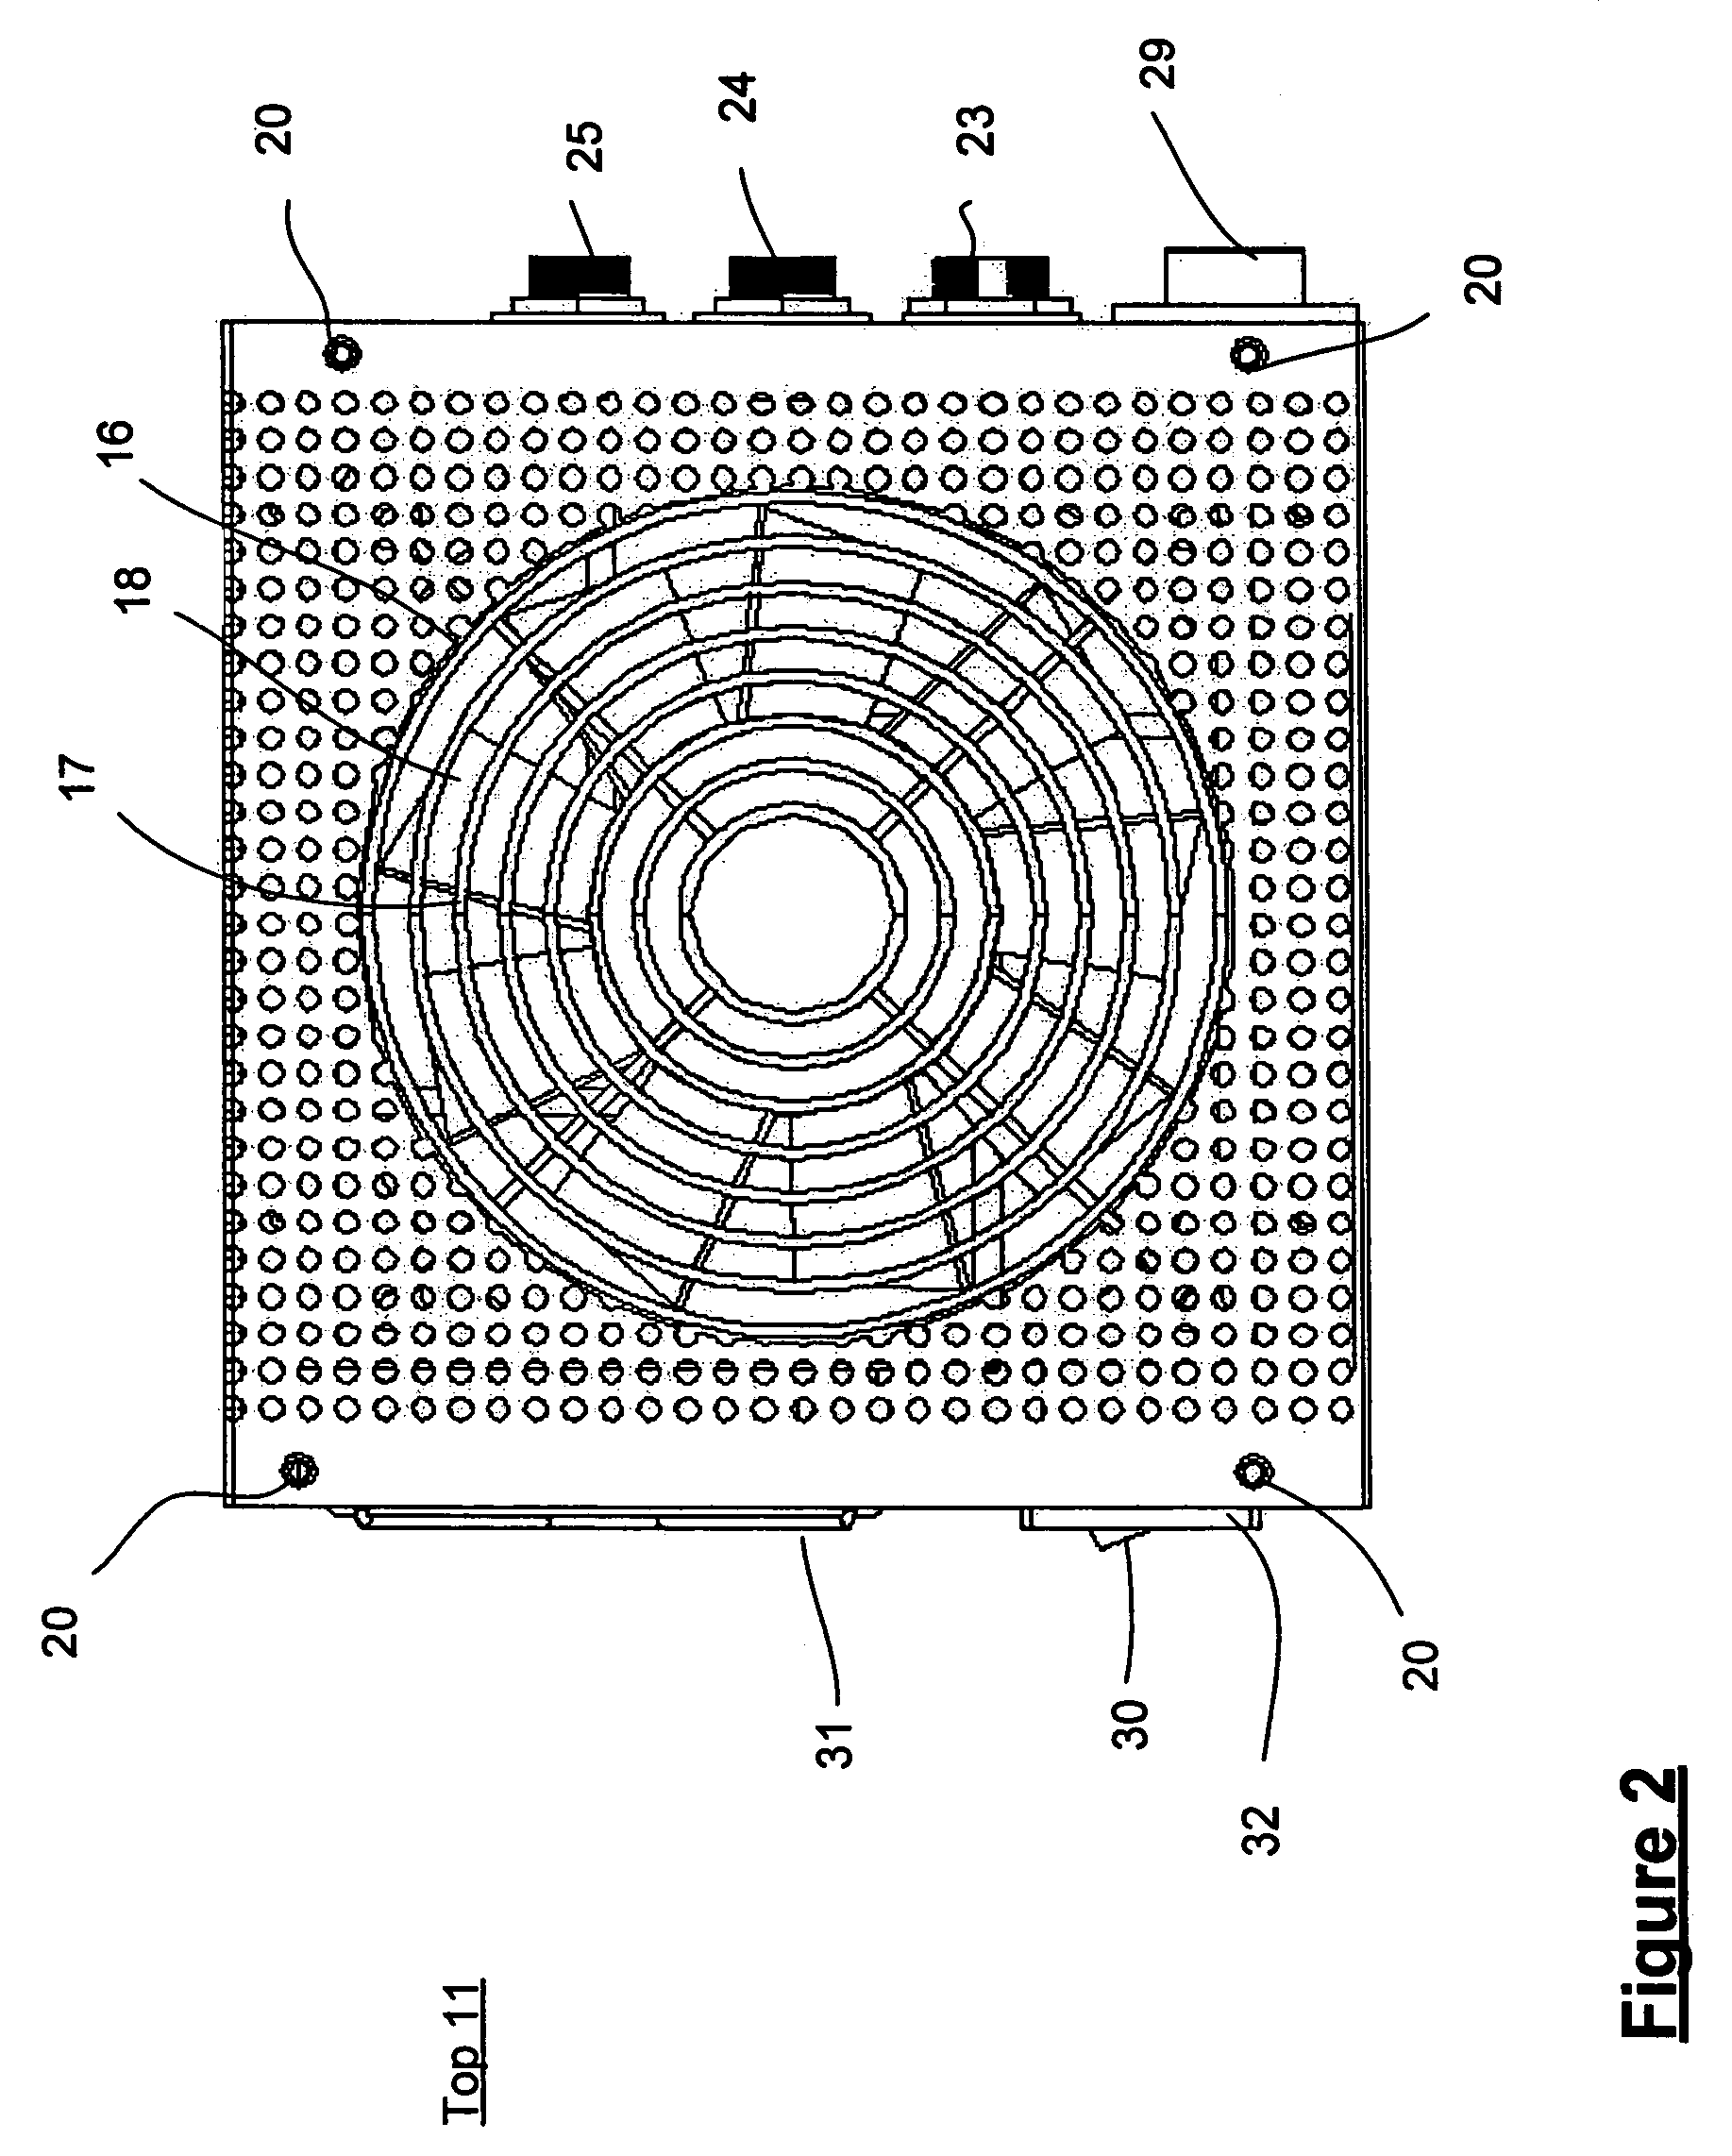 Power supply unit with perforated housing